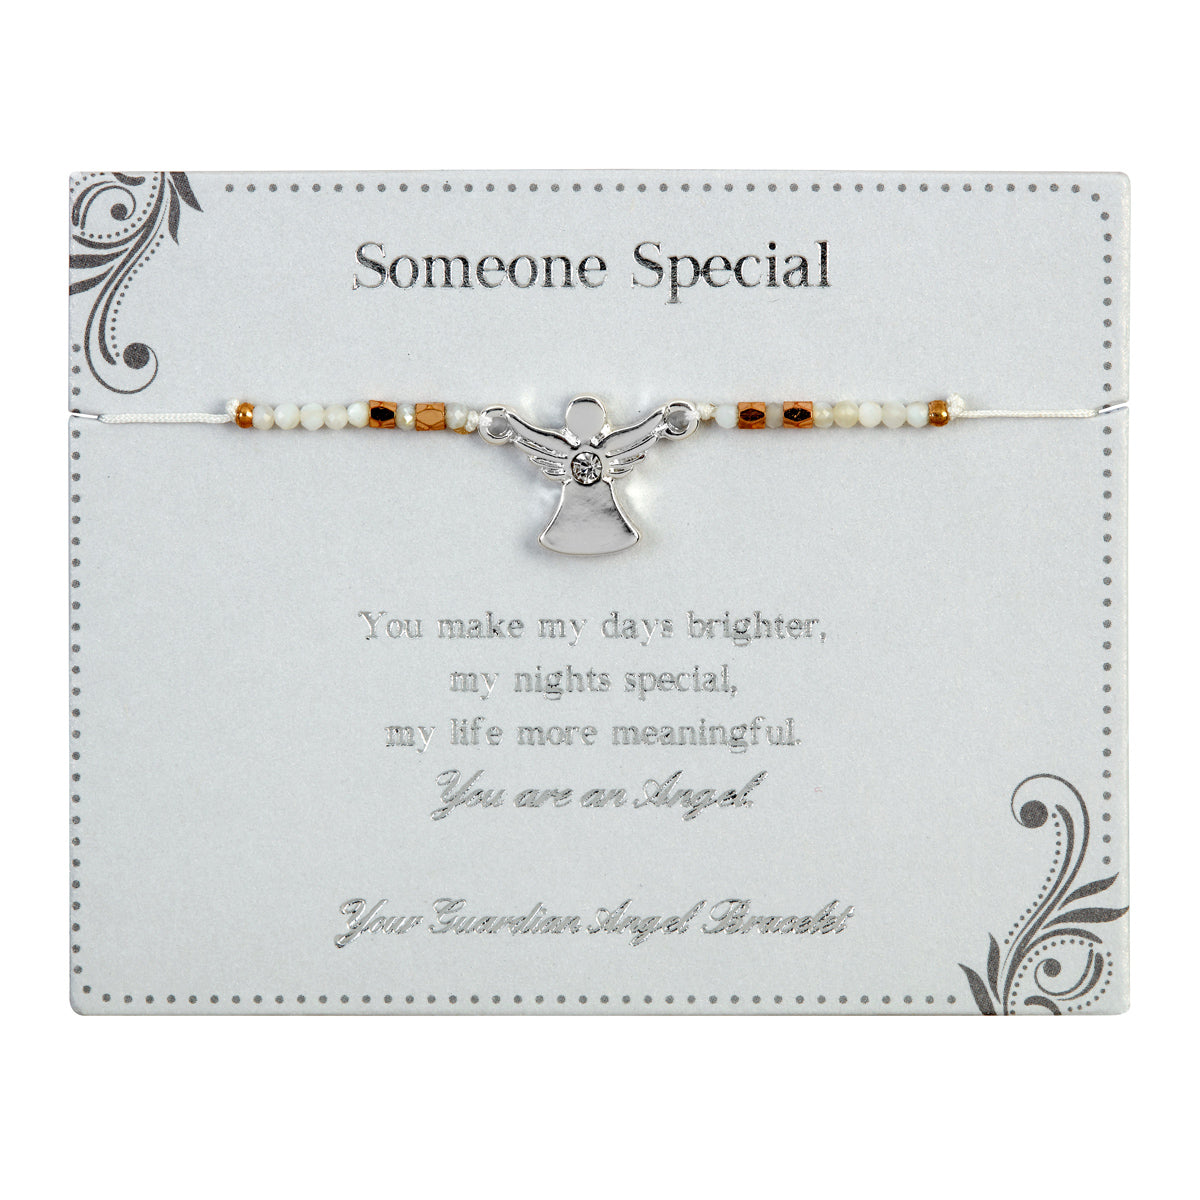 Someone Special Guardian Angel Bracelet On Beaded String With Envelope